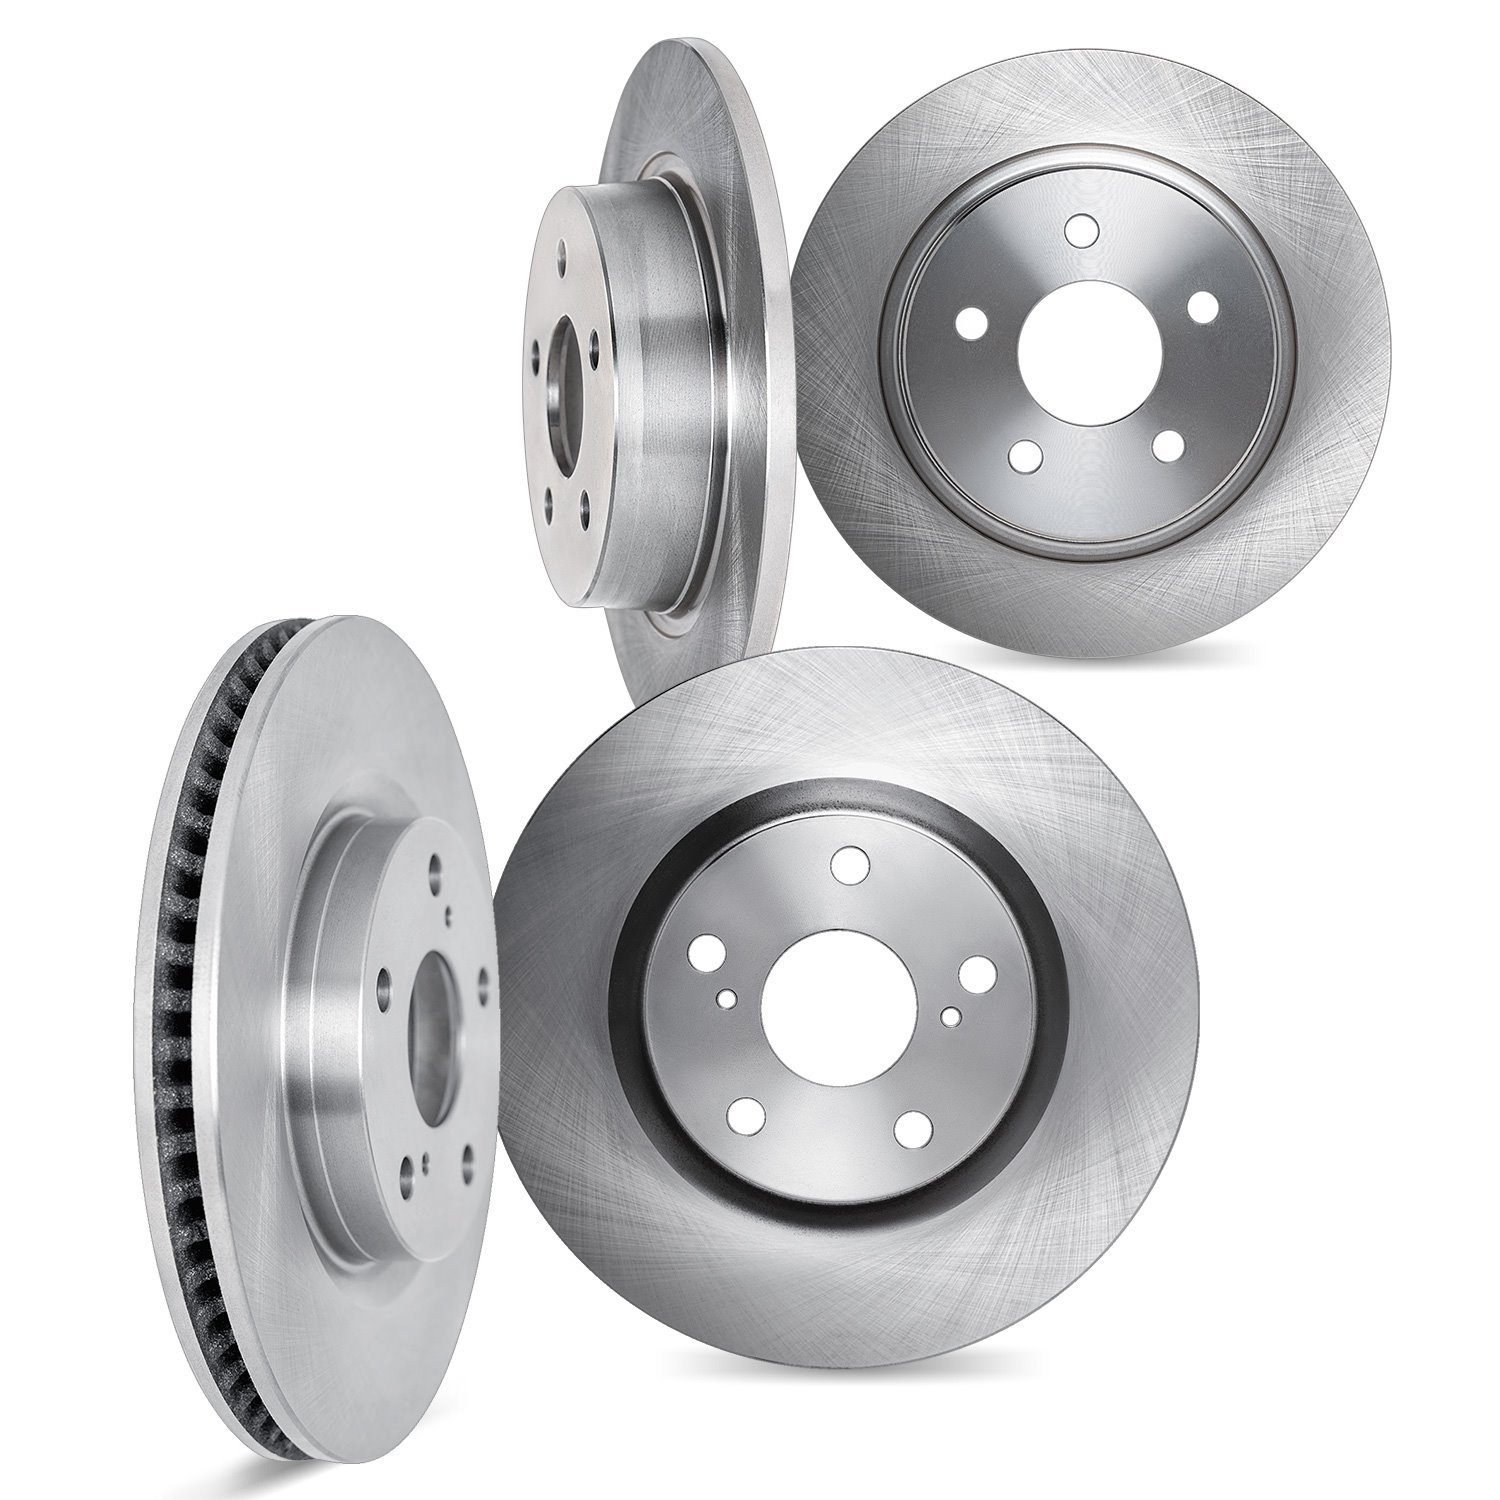 6004-76164 Brake Rotors, Fits Select Lexus/Toyota/Scion, Position: Front and Rear